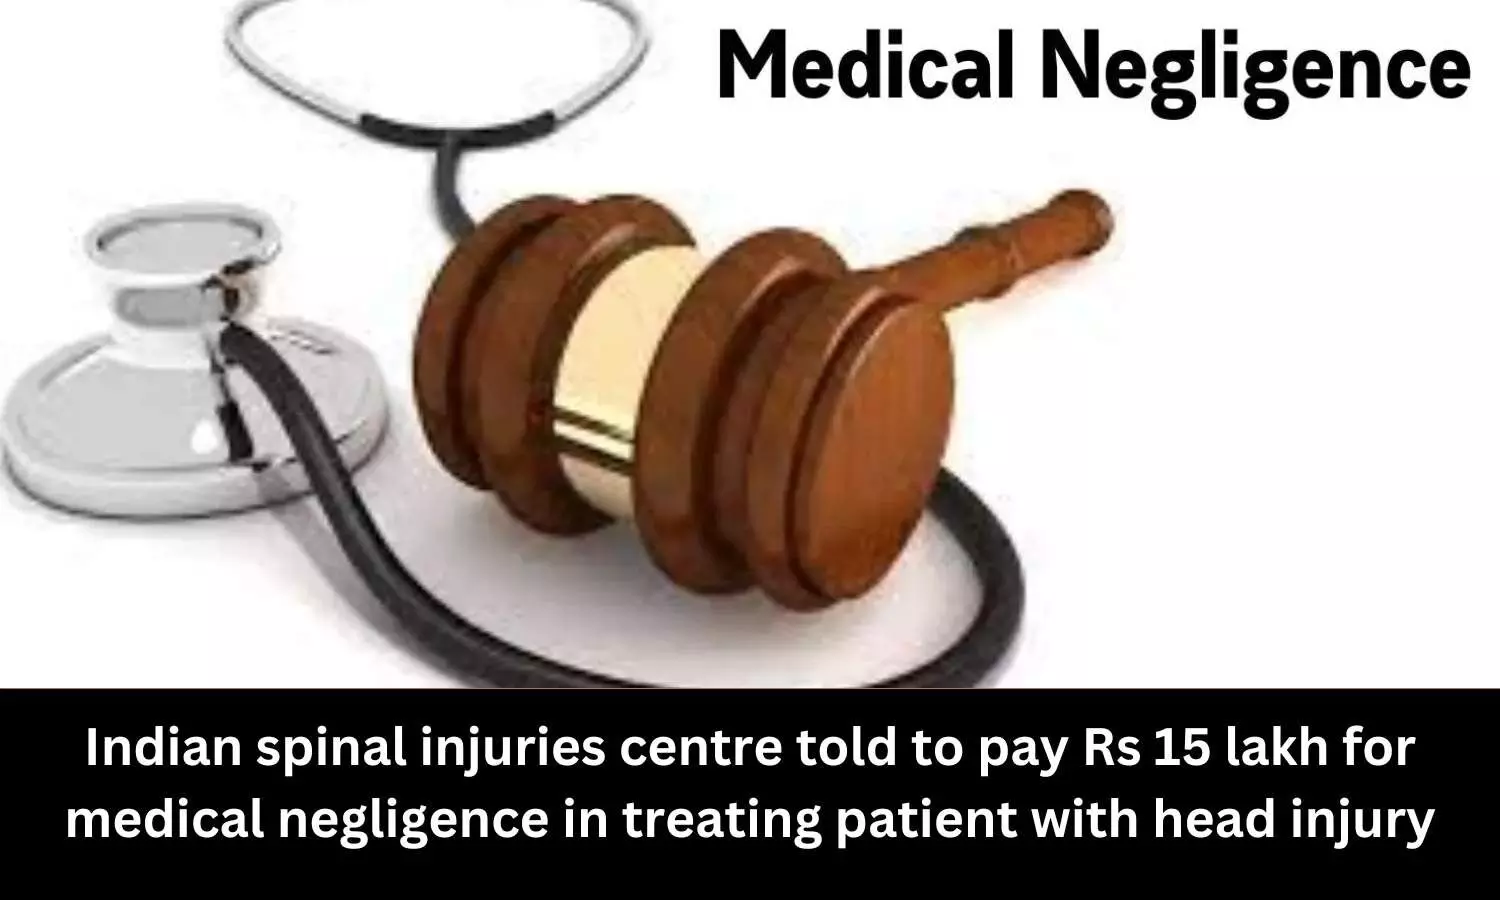 NCDRC directs Indian Spinal Injuries Centre to pay Rs 15 lakh for medical negligence in treating patient with head injury